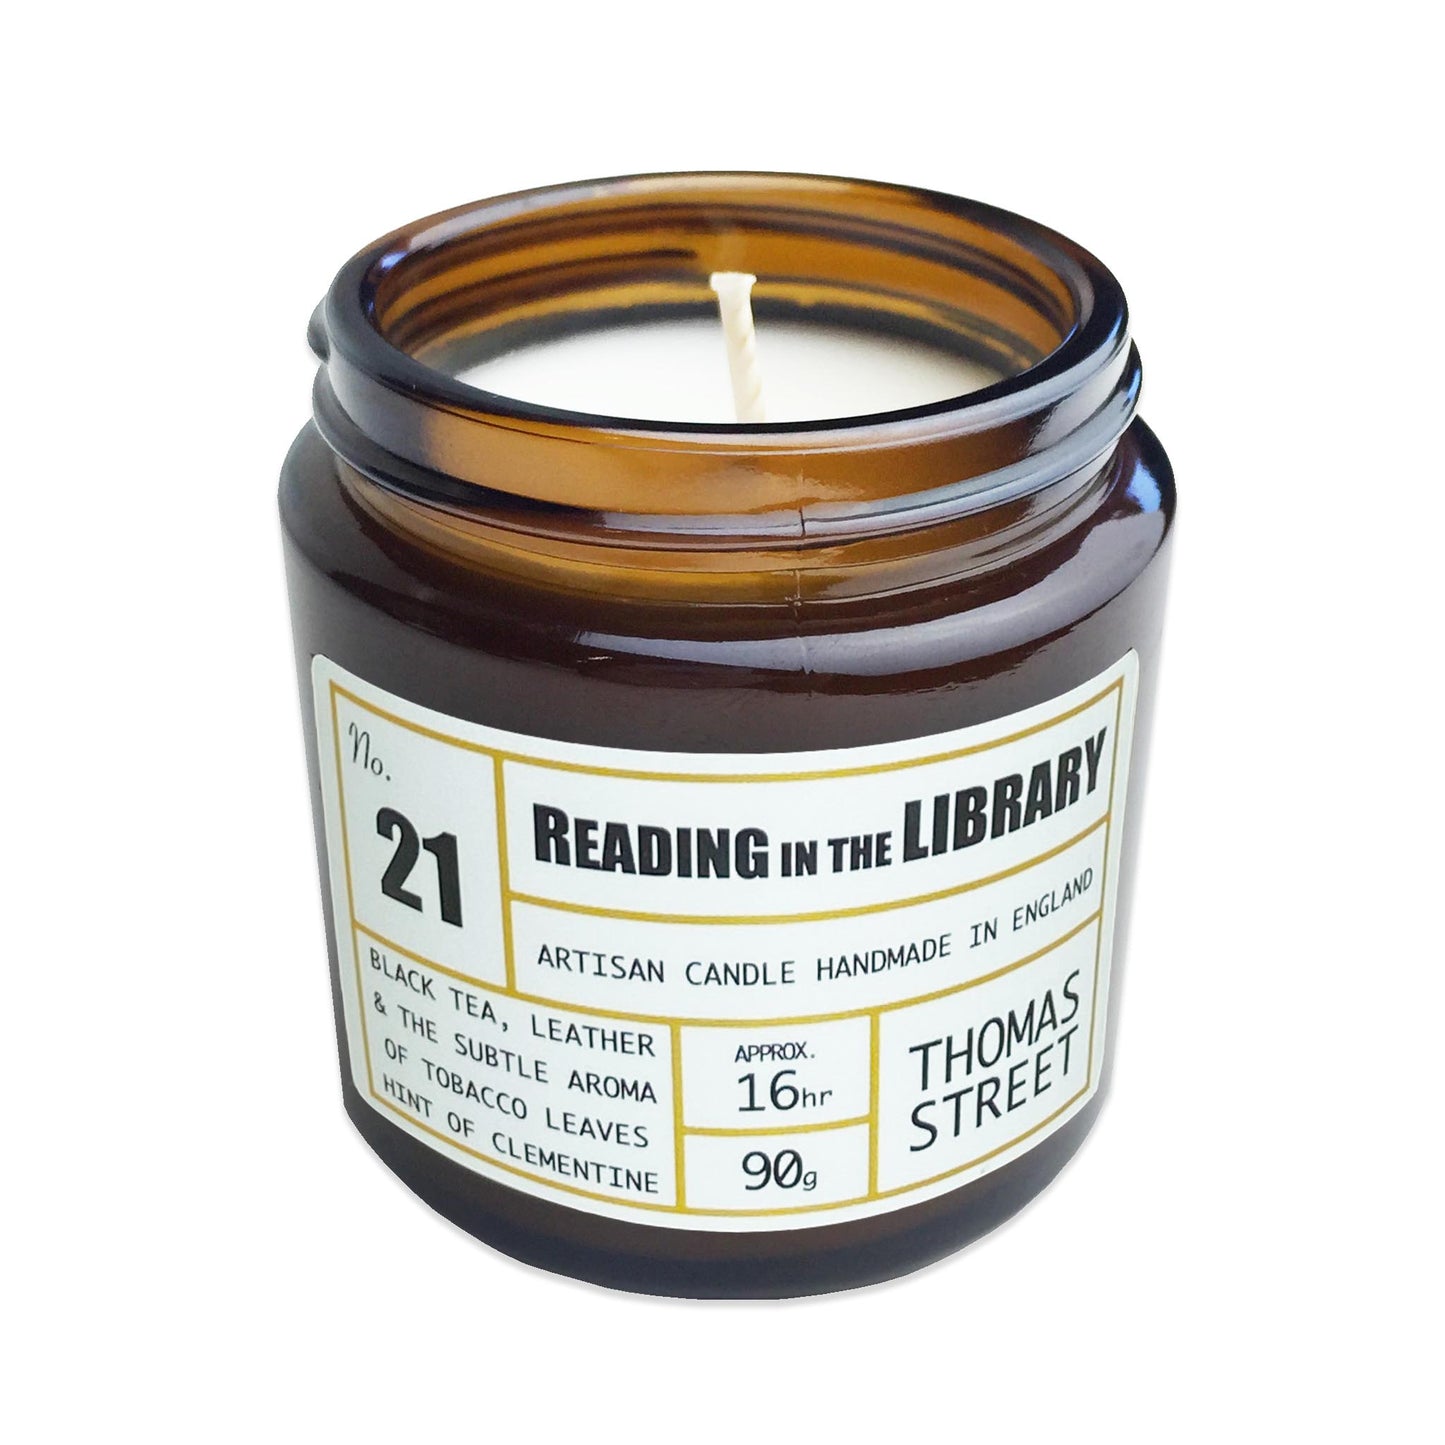 Thomas Street Apothecary Candle Jar 200g Reading In The Library